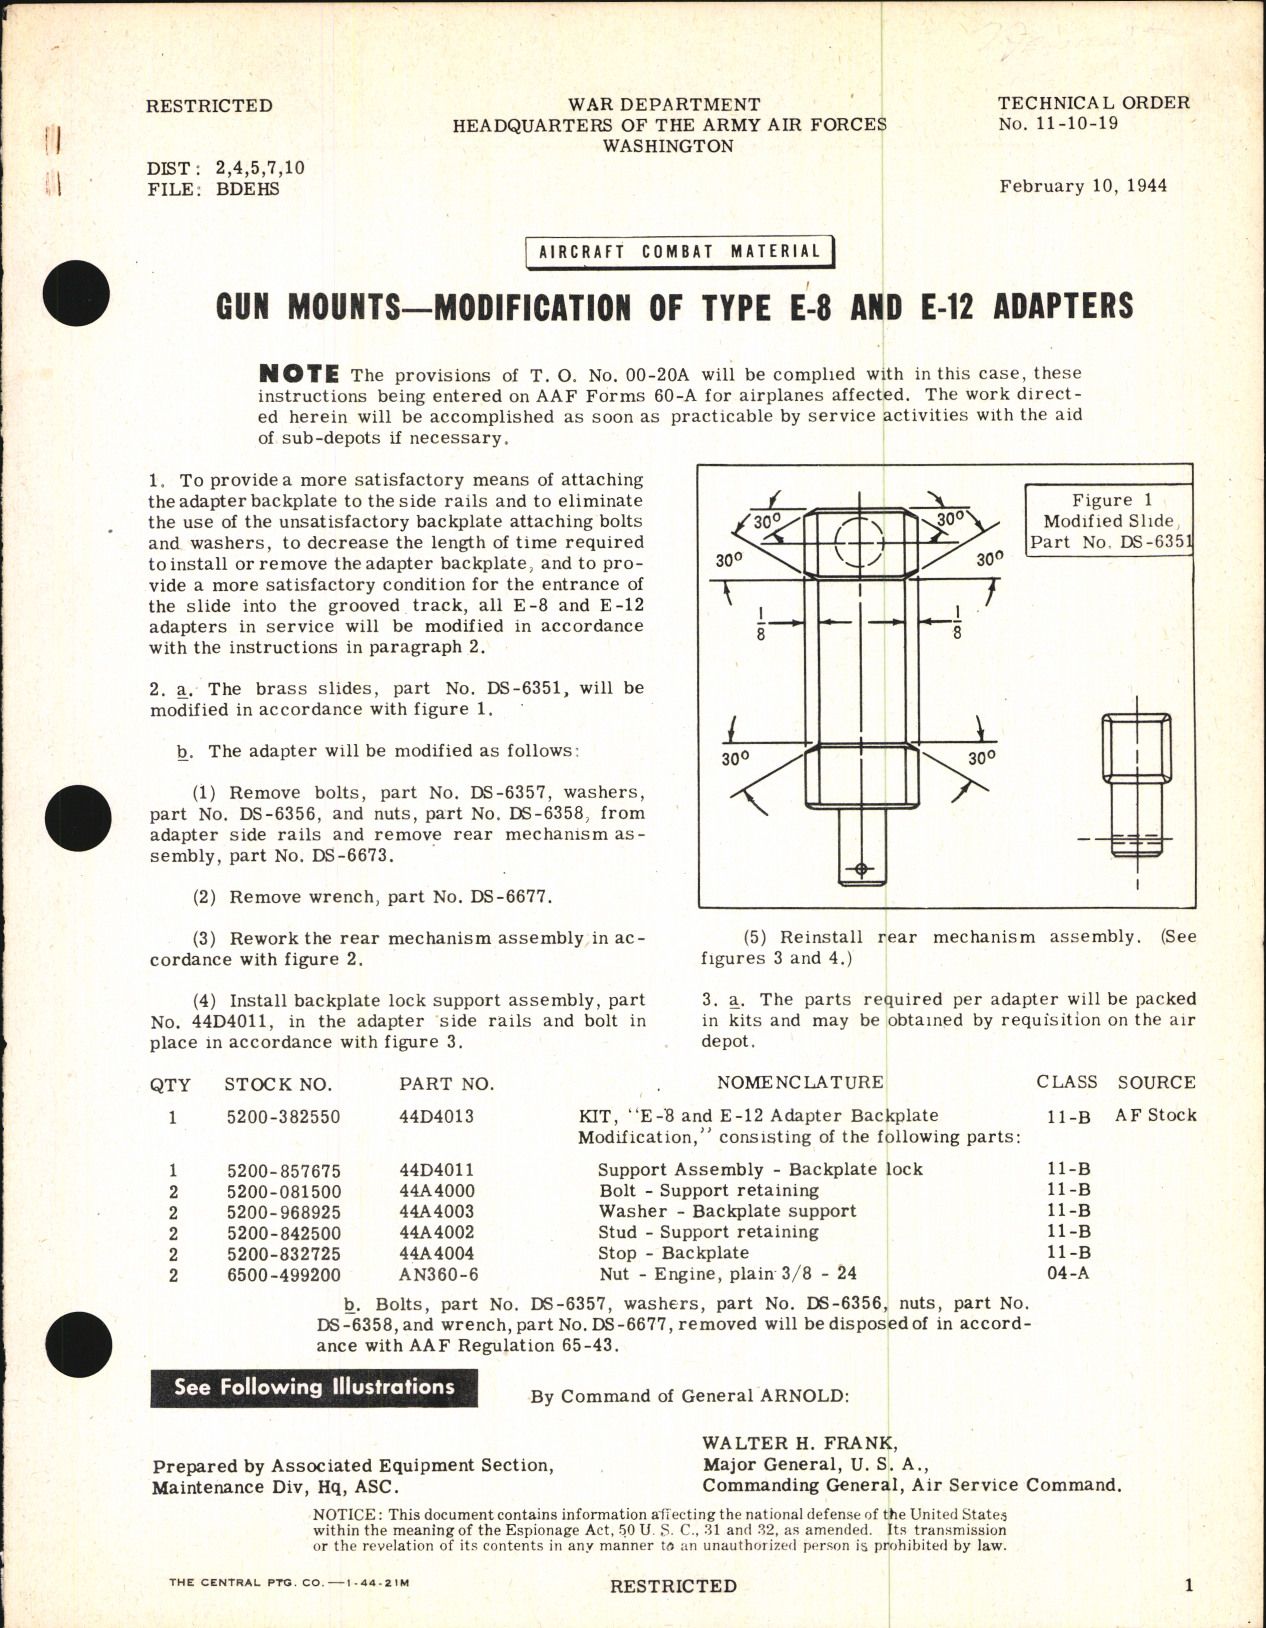 Sample page 1 from AirCorps Library document: Modification of Type E-8 and E-12 Gun Mount Adapters